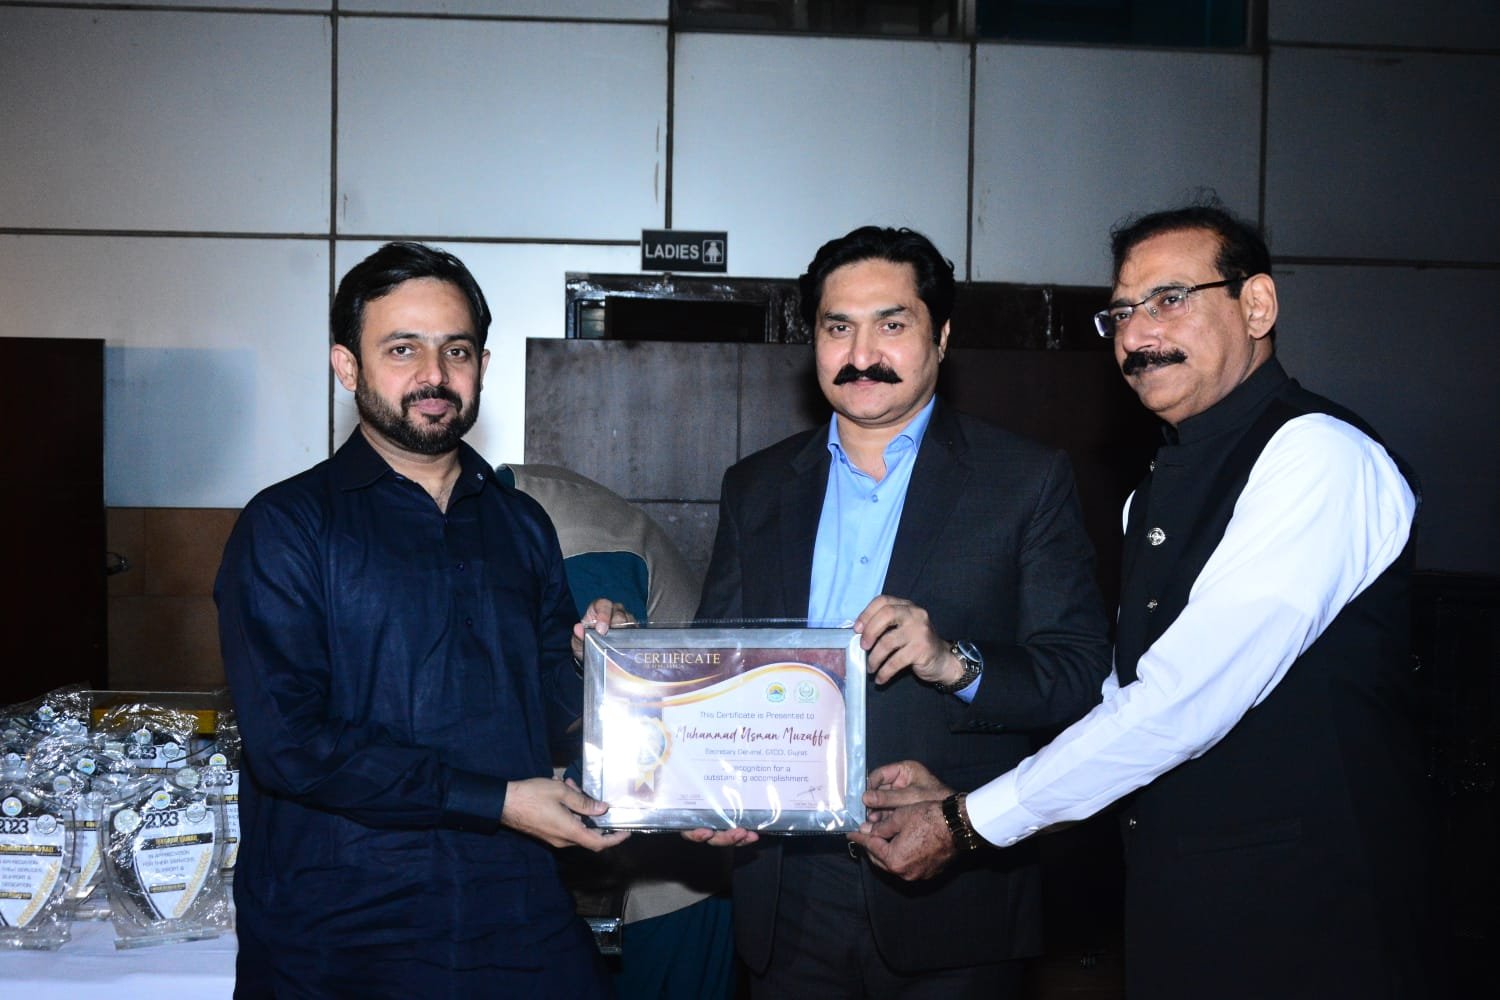 #District #Administration has organized an #appreciation program plus #dinner in #honor of Gujrat Chamber of Commerce and Industry for successfully managing the events of 14 August, 12 #Rabi_ul_Awal and #Muharram events , special recognition was made with #souvenirs and #shields to Mr. Sikander Ishfaq Razi #President #GtCCI, Mr. Muhammad Asad Bhatti  #SVP #GtCCI, Mr. Muhammad Masoom Qamar #VP #GtCCI and Mr. Muhammad Usman Muzaffar Secretary General #GtCCI. Local administrative officers were also present.